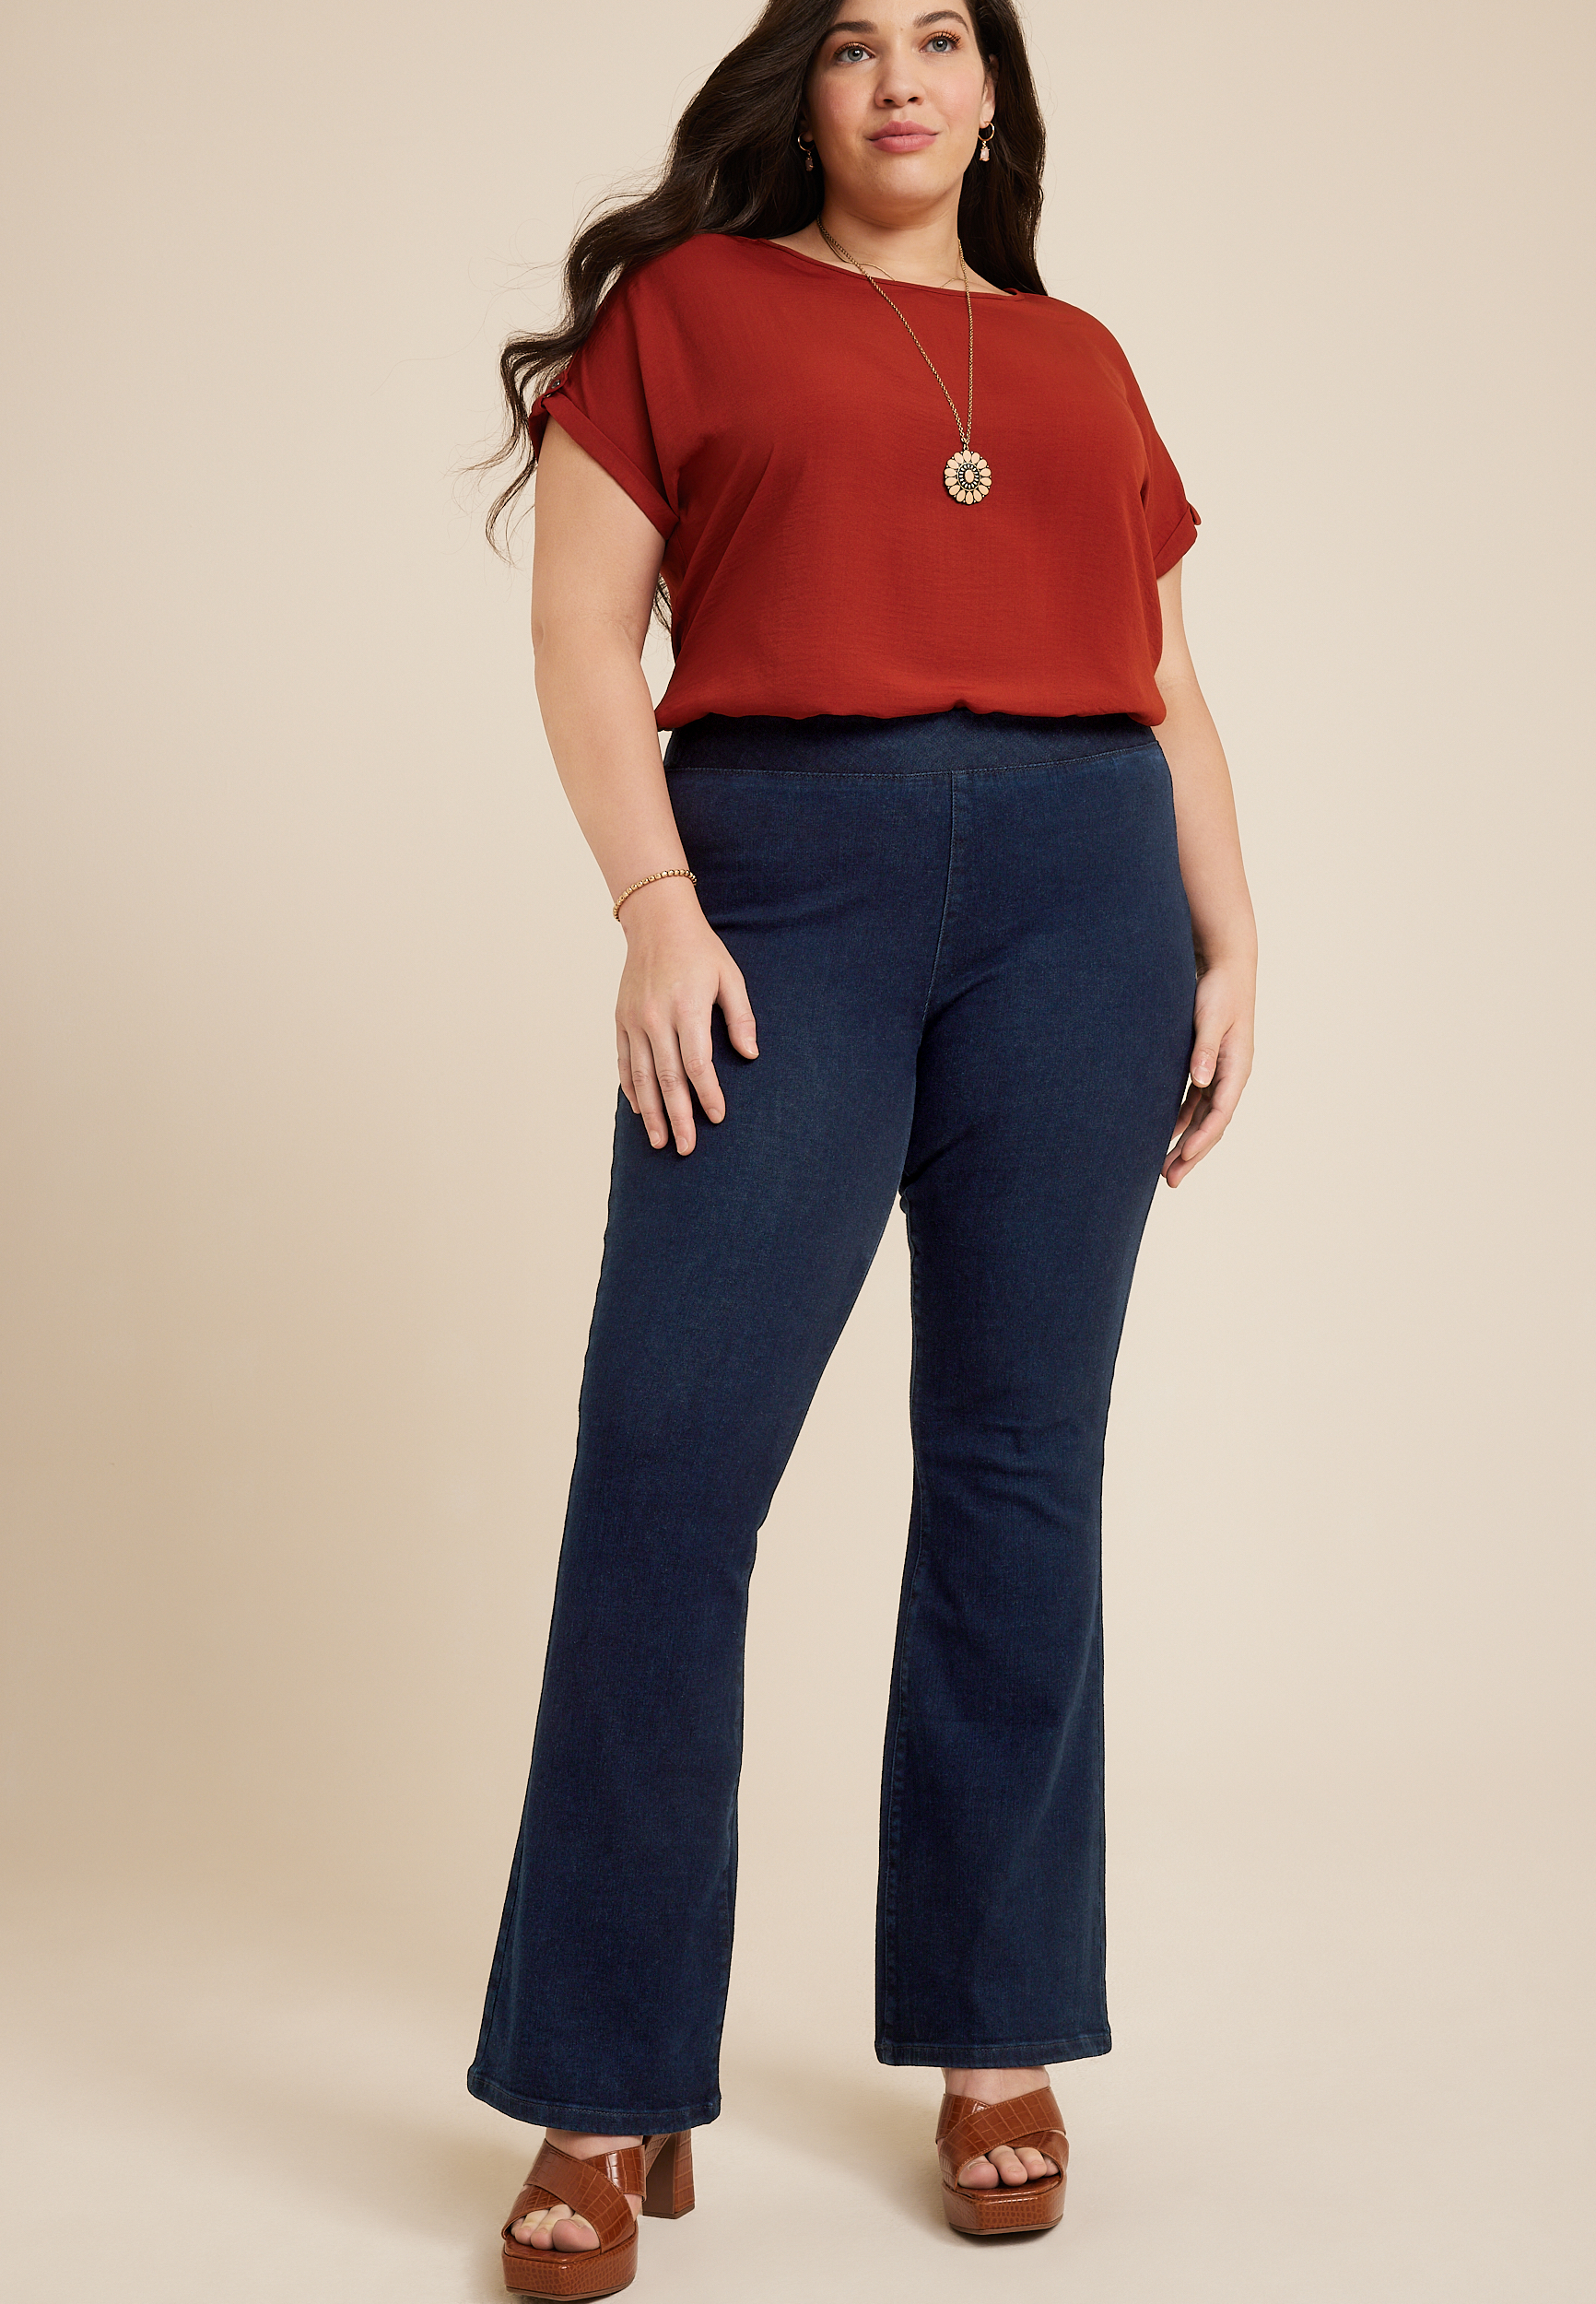 Plus Size m jeans by maurices™ Flare Sleek Pull On High Rise Jean